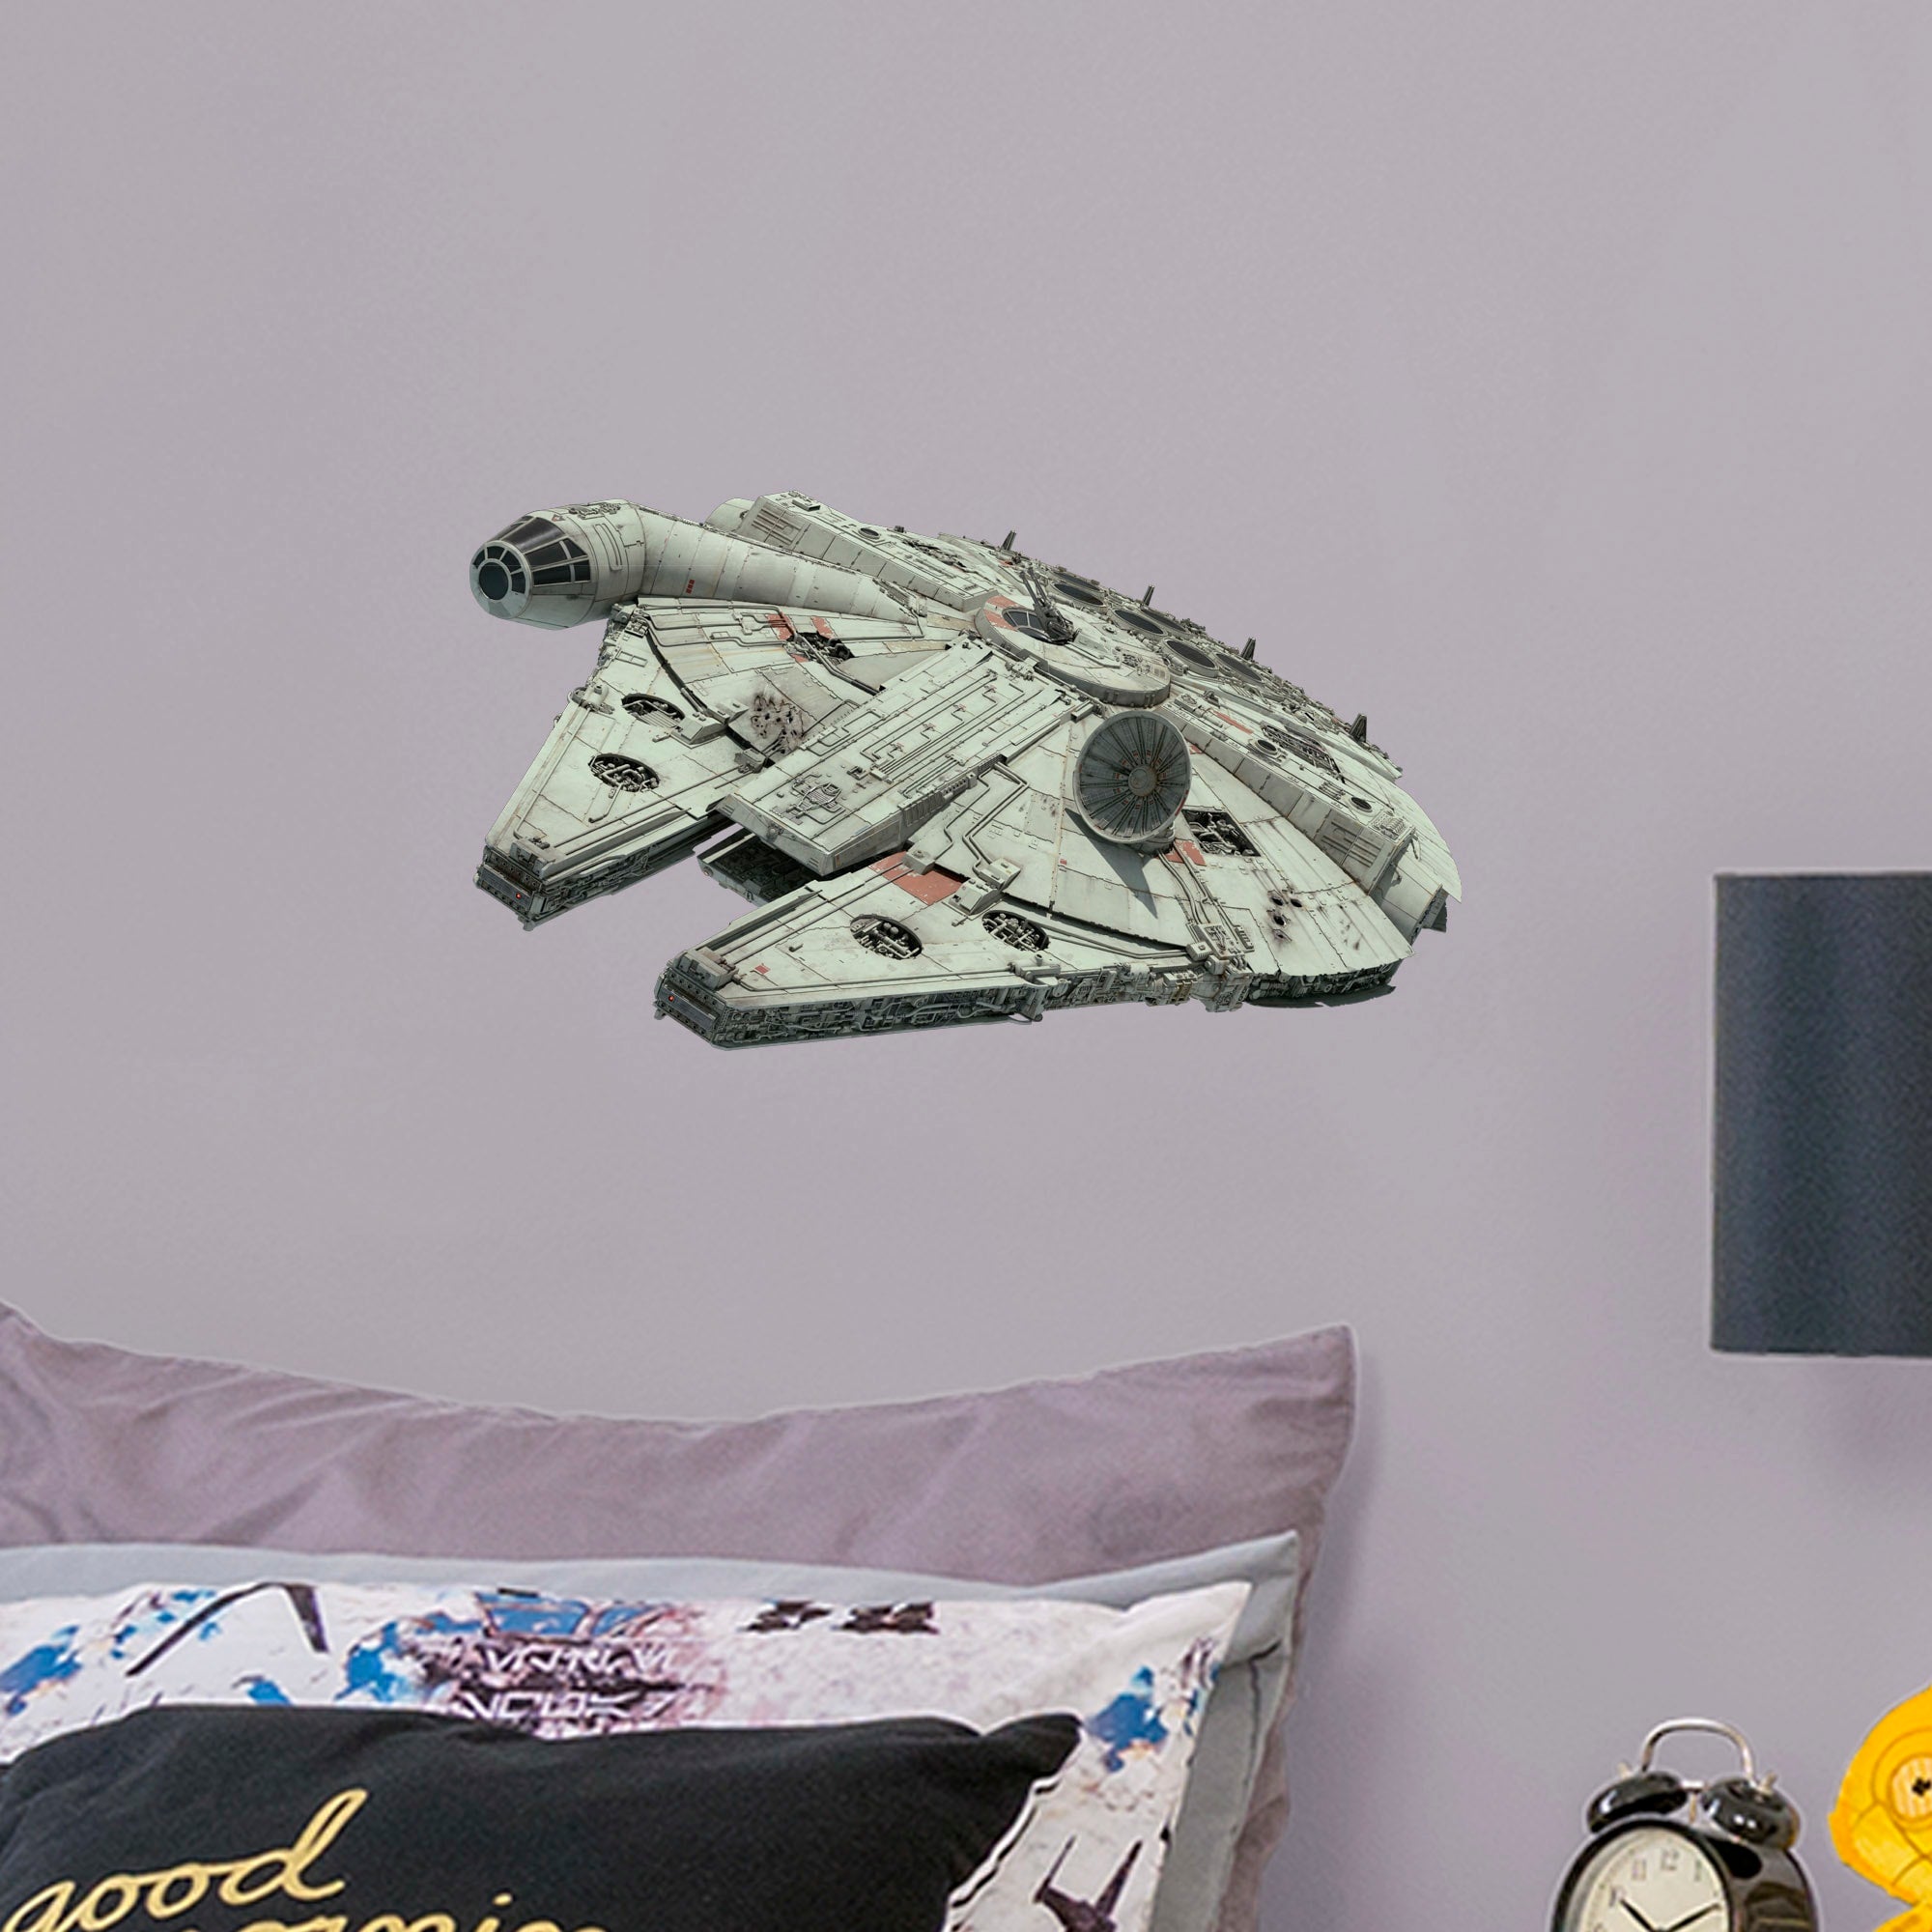 Millennium Falcon - Star Wars: The Rise of Skywalker - Officially Licensed Removable Wall Decal Large by Fathead | Vinyl